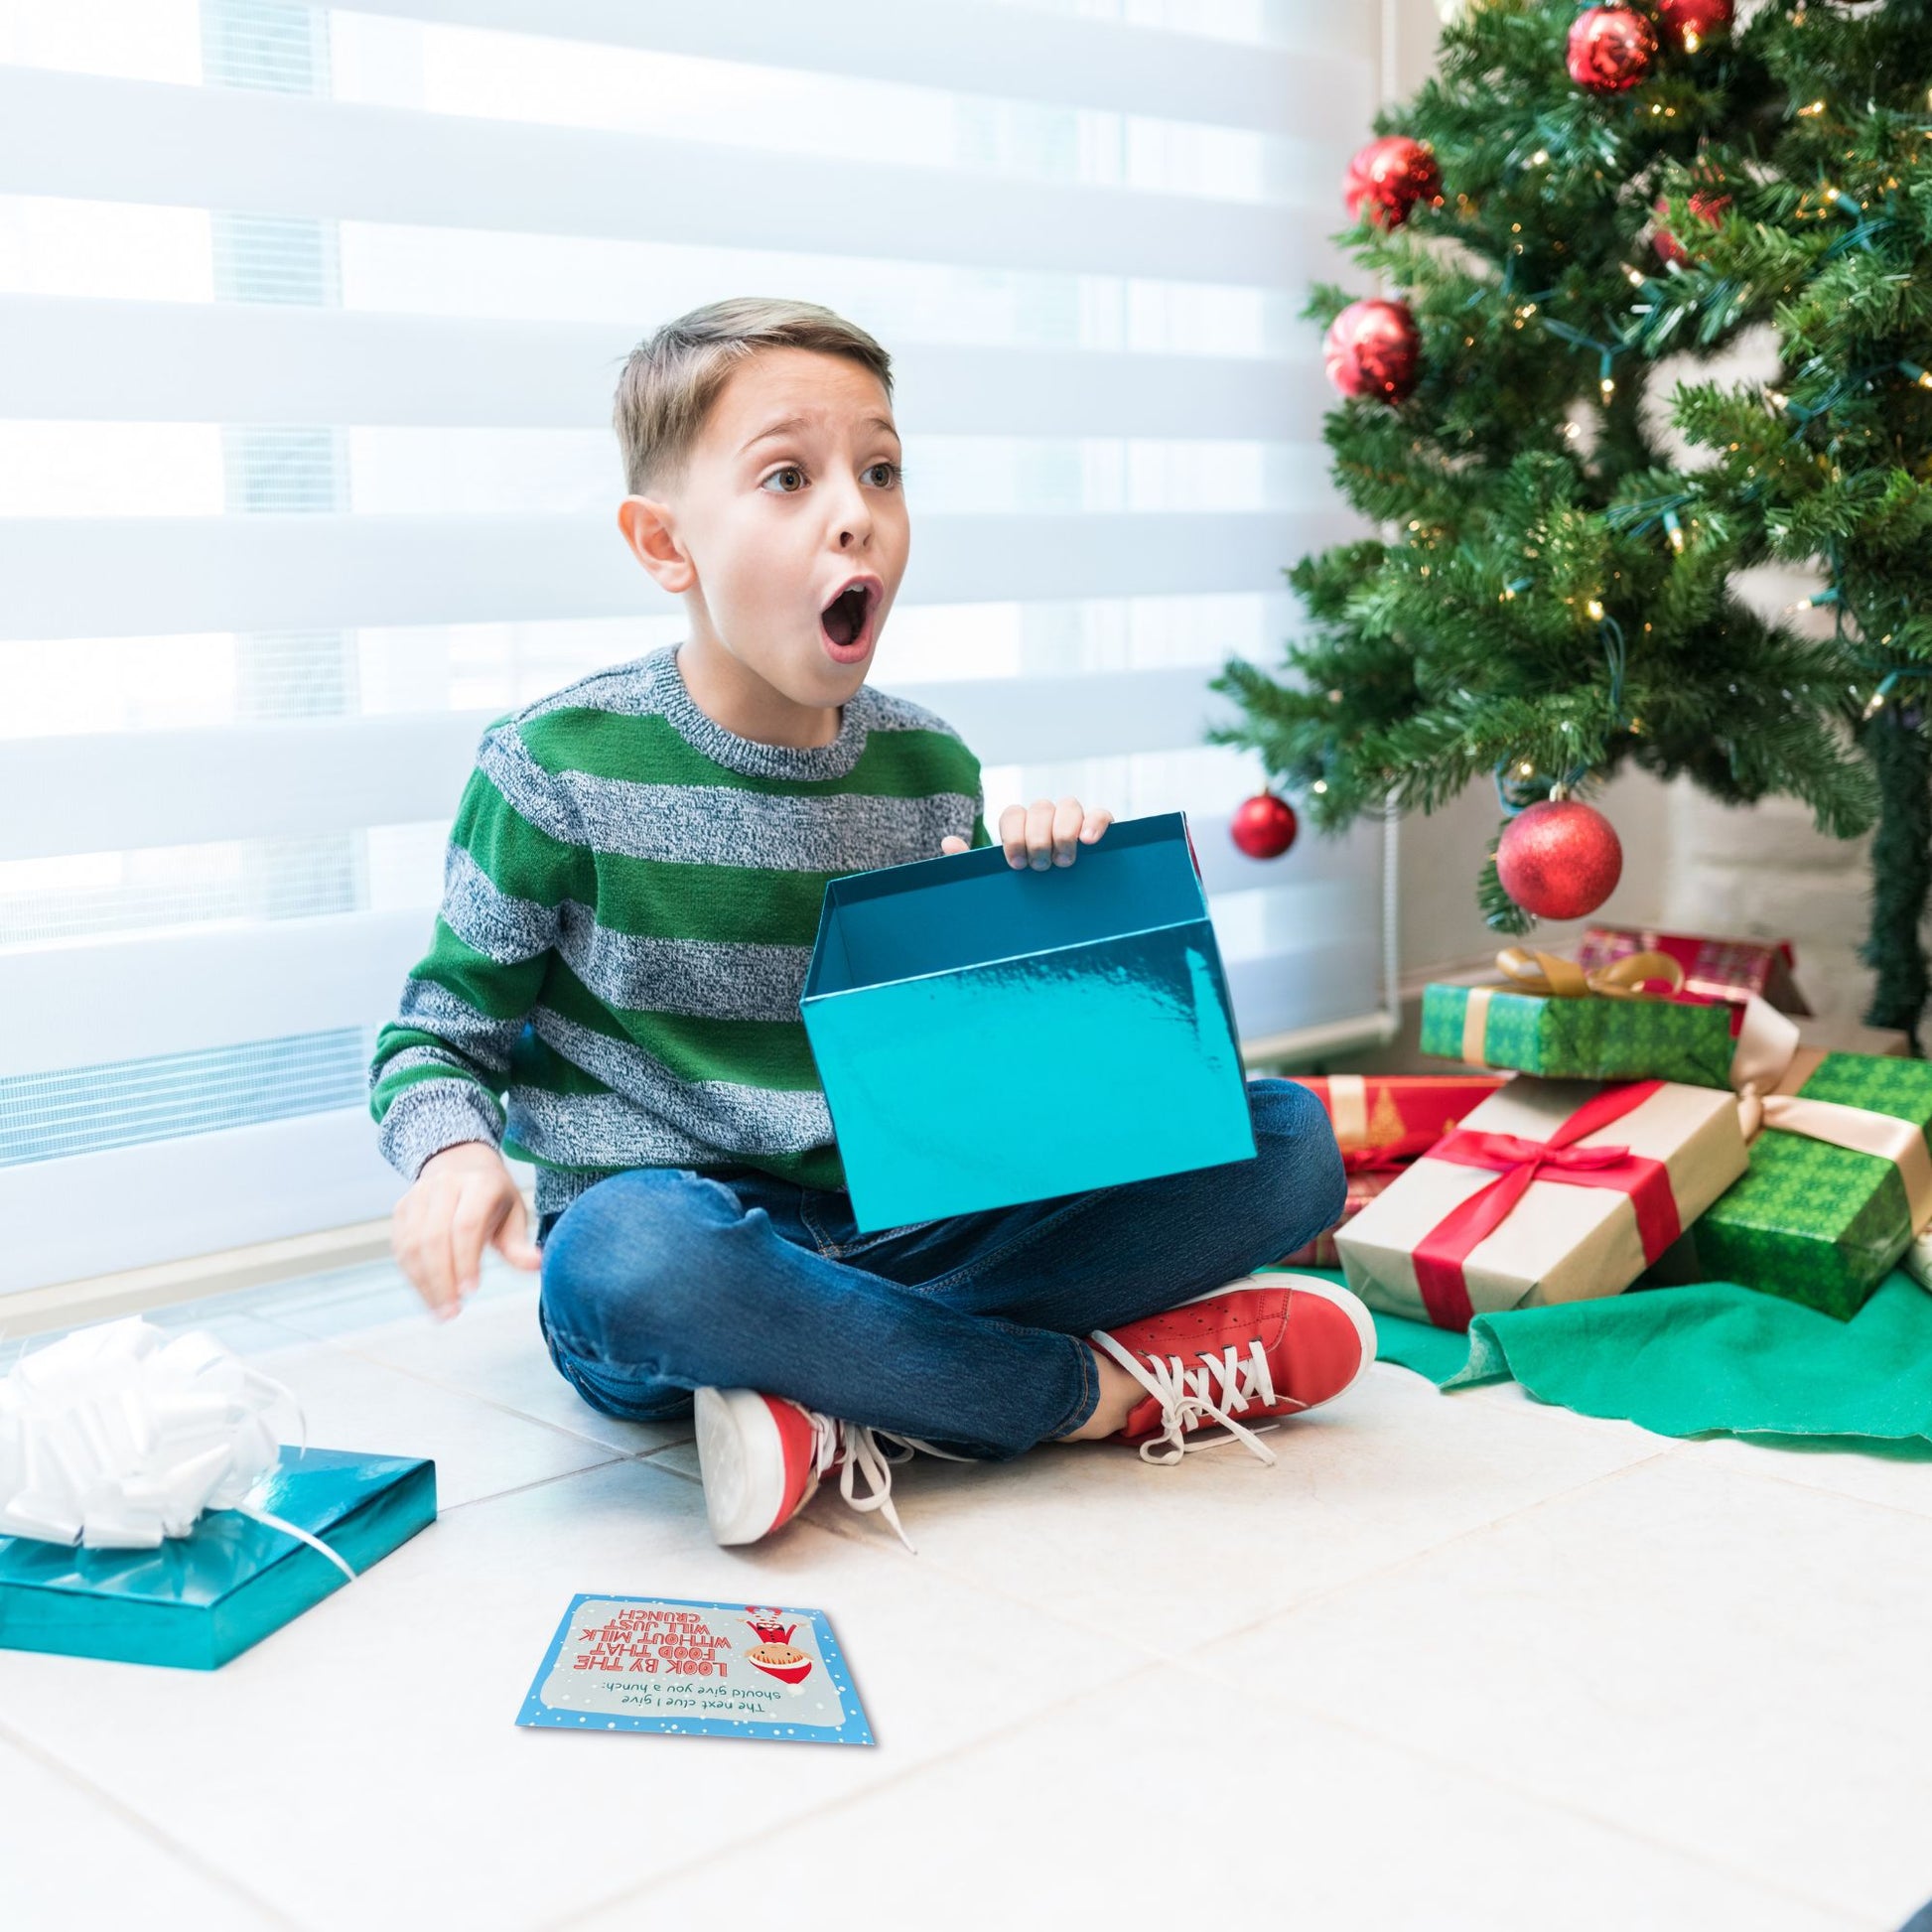 A boy looks up in happy disbelief as he opens the package at the end of a Christmas treasure hunt